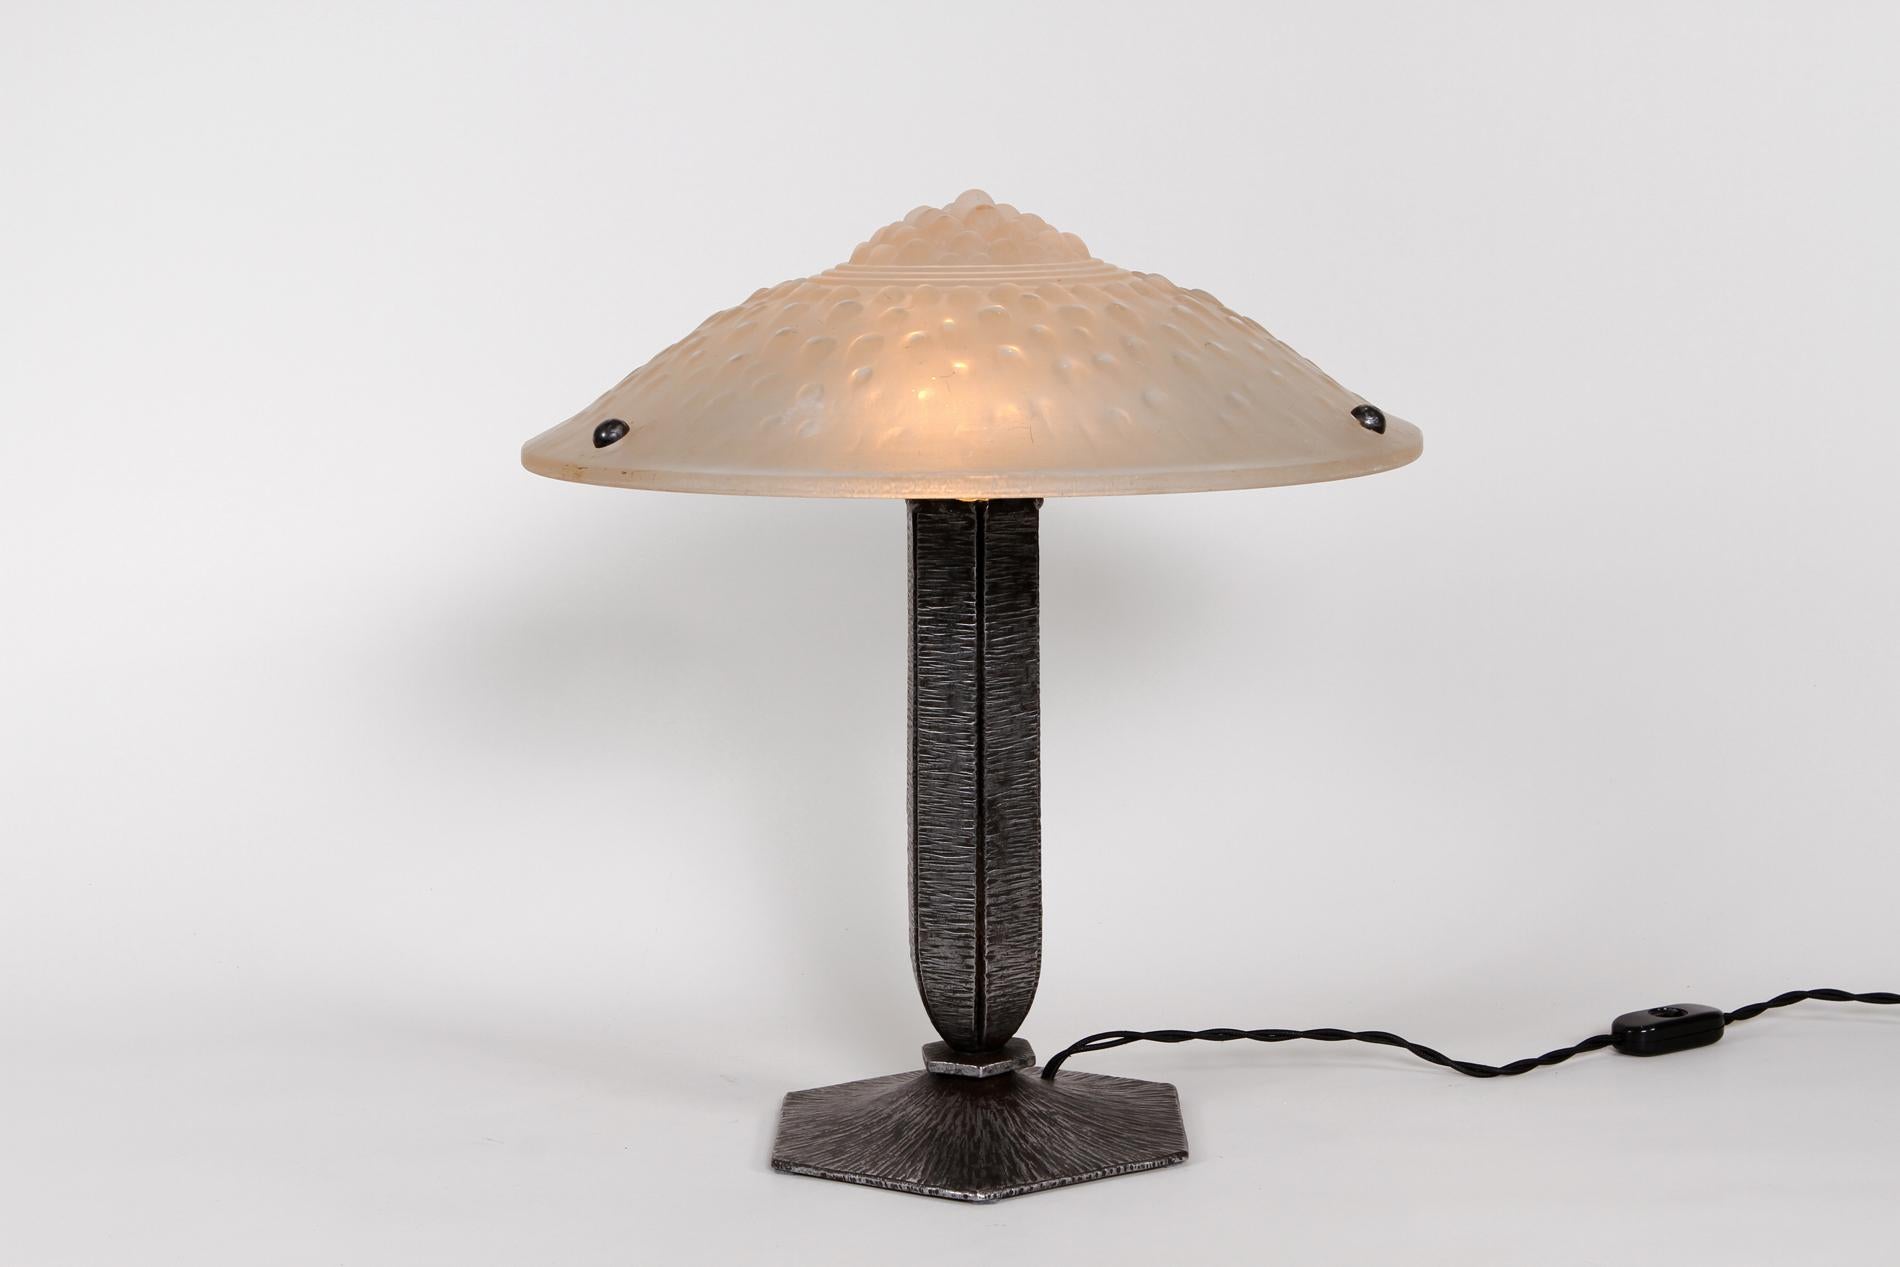 French Art Deco table lamp with wrought iron base and glass by Muller Frères Luneville original piece from 1930. The elegant design of the lamp is simple and minimal, with geometric decor on the lampshade and a geometric base. 